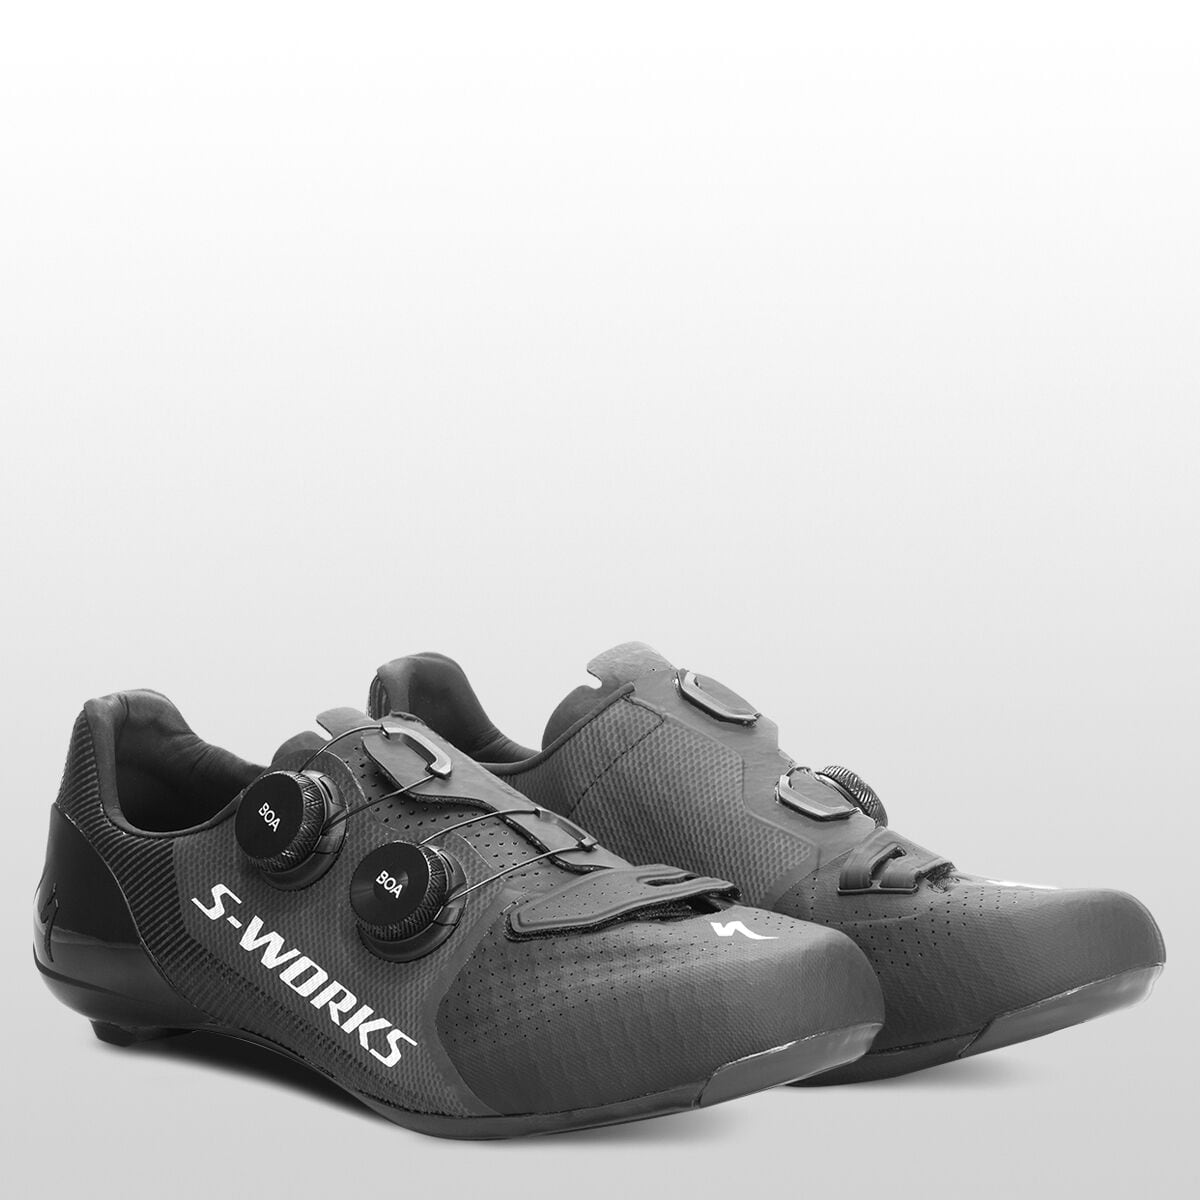 Specialized S-Works 7 Cycling Shoe - Men